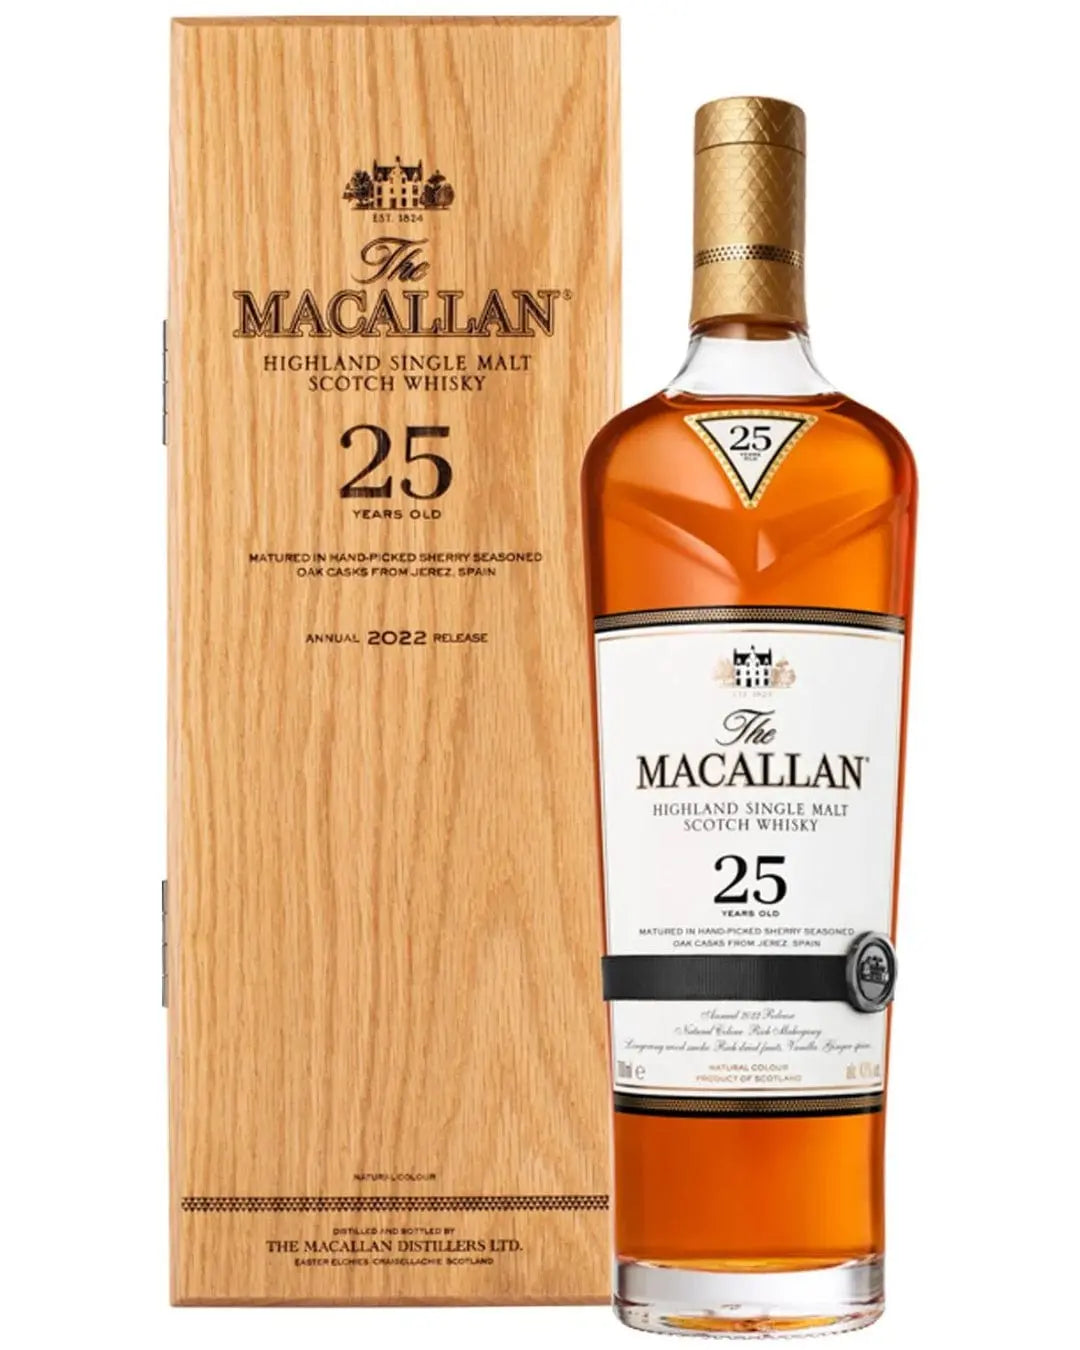 Macallan 25 Year Old Sherry Oak 2022 Release Malt Whisky, 70 cl Whisky 5010314003807